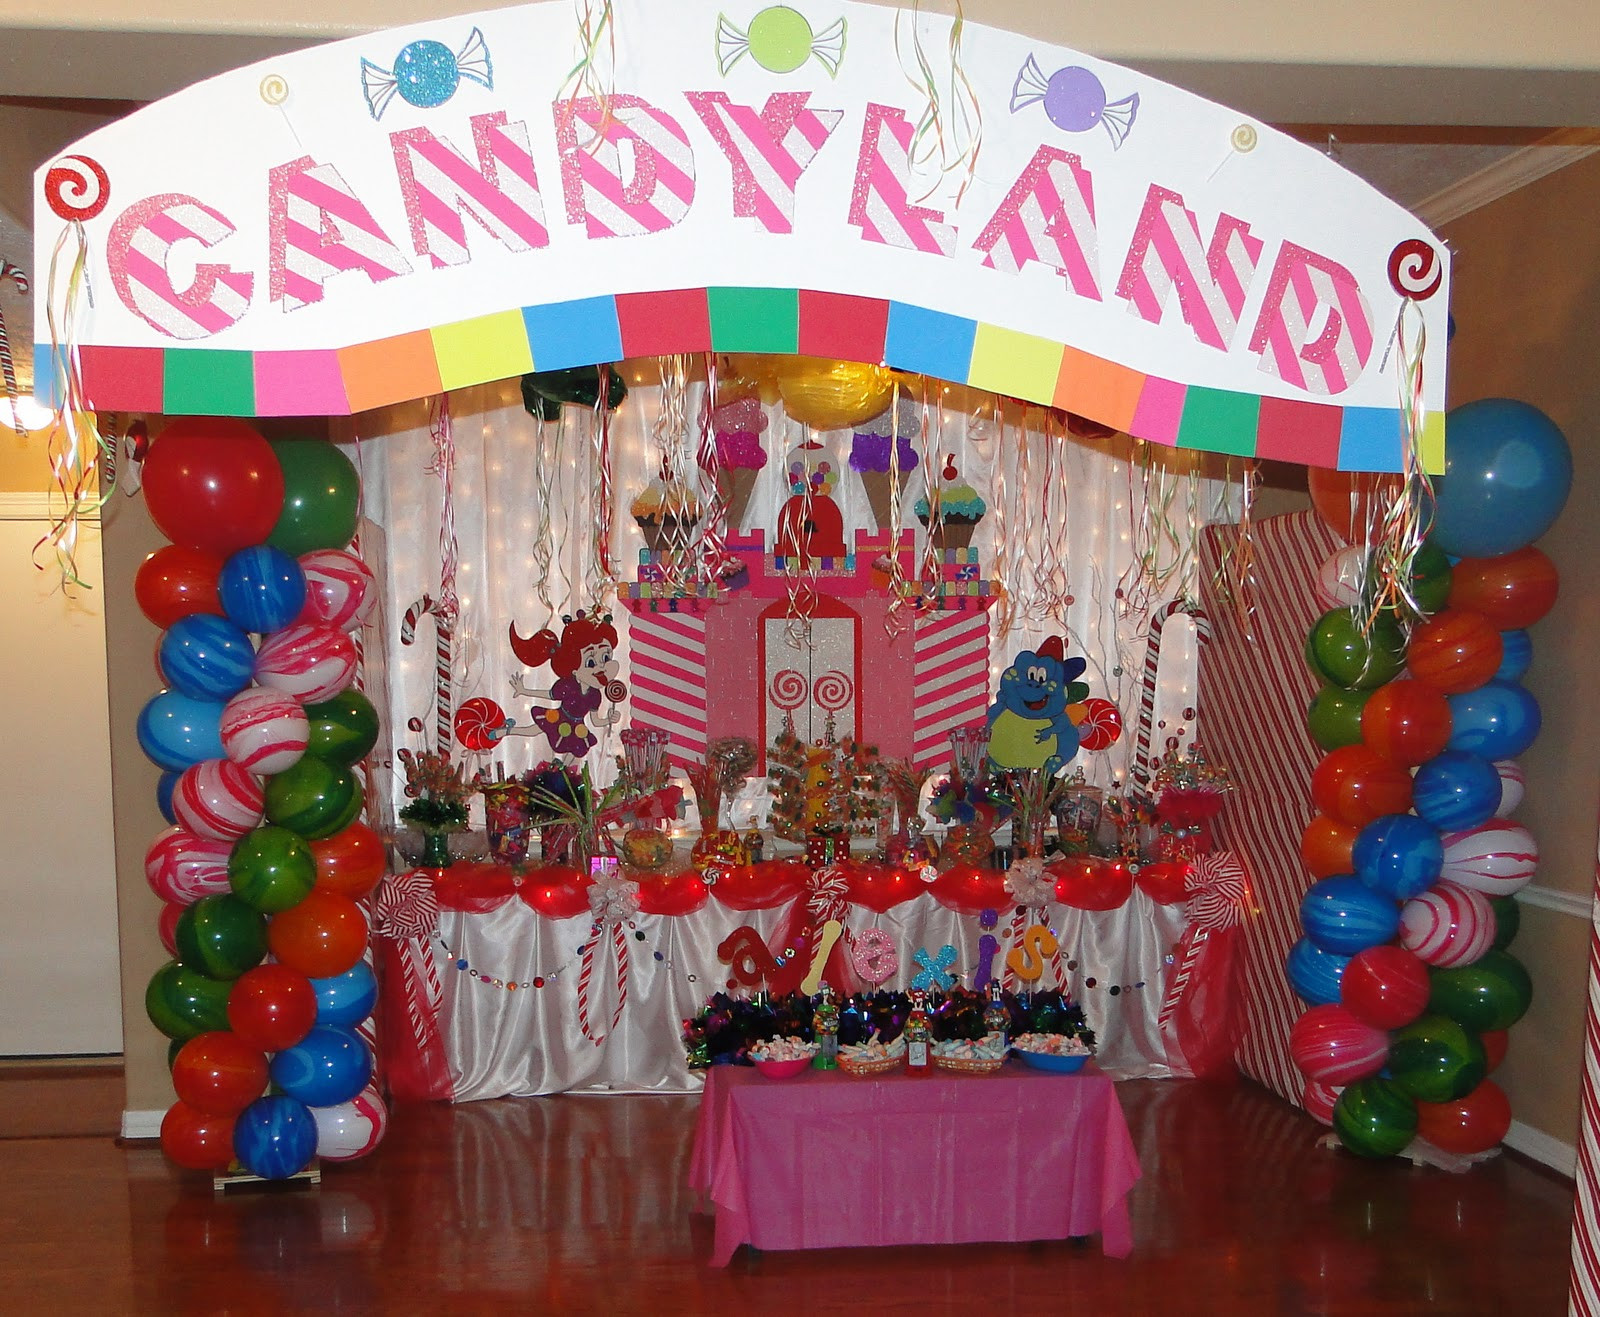 Candyland Birthday Party Decorations
 Unfor table Creations Designed by Maria Candyland